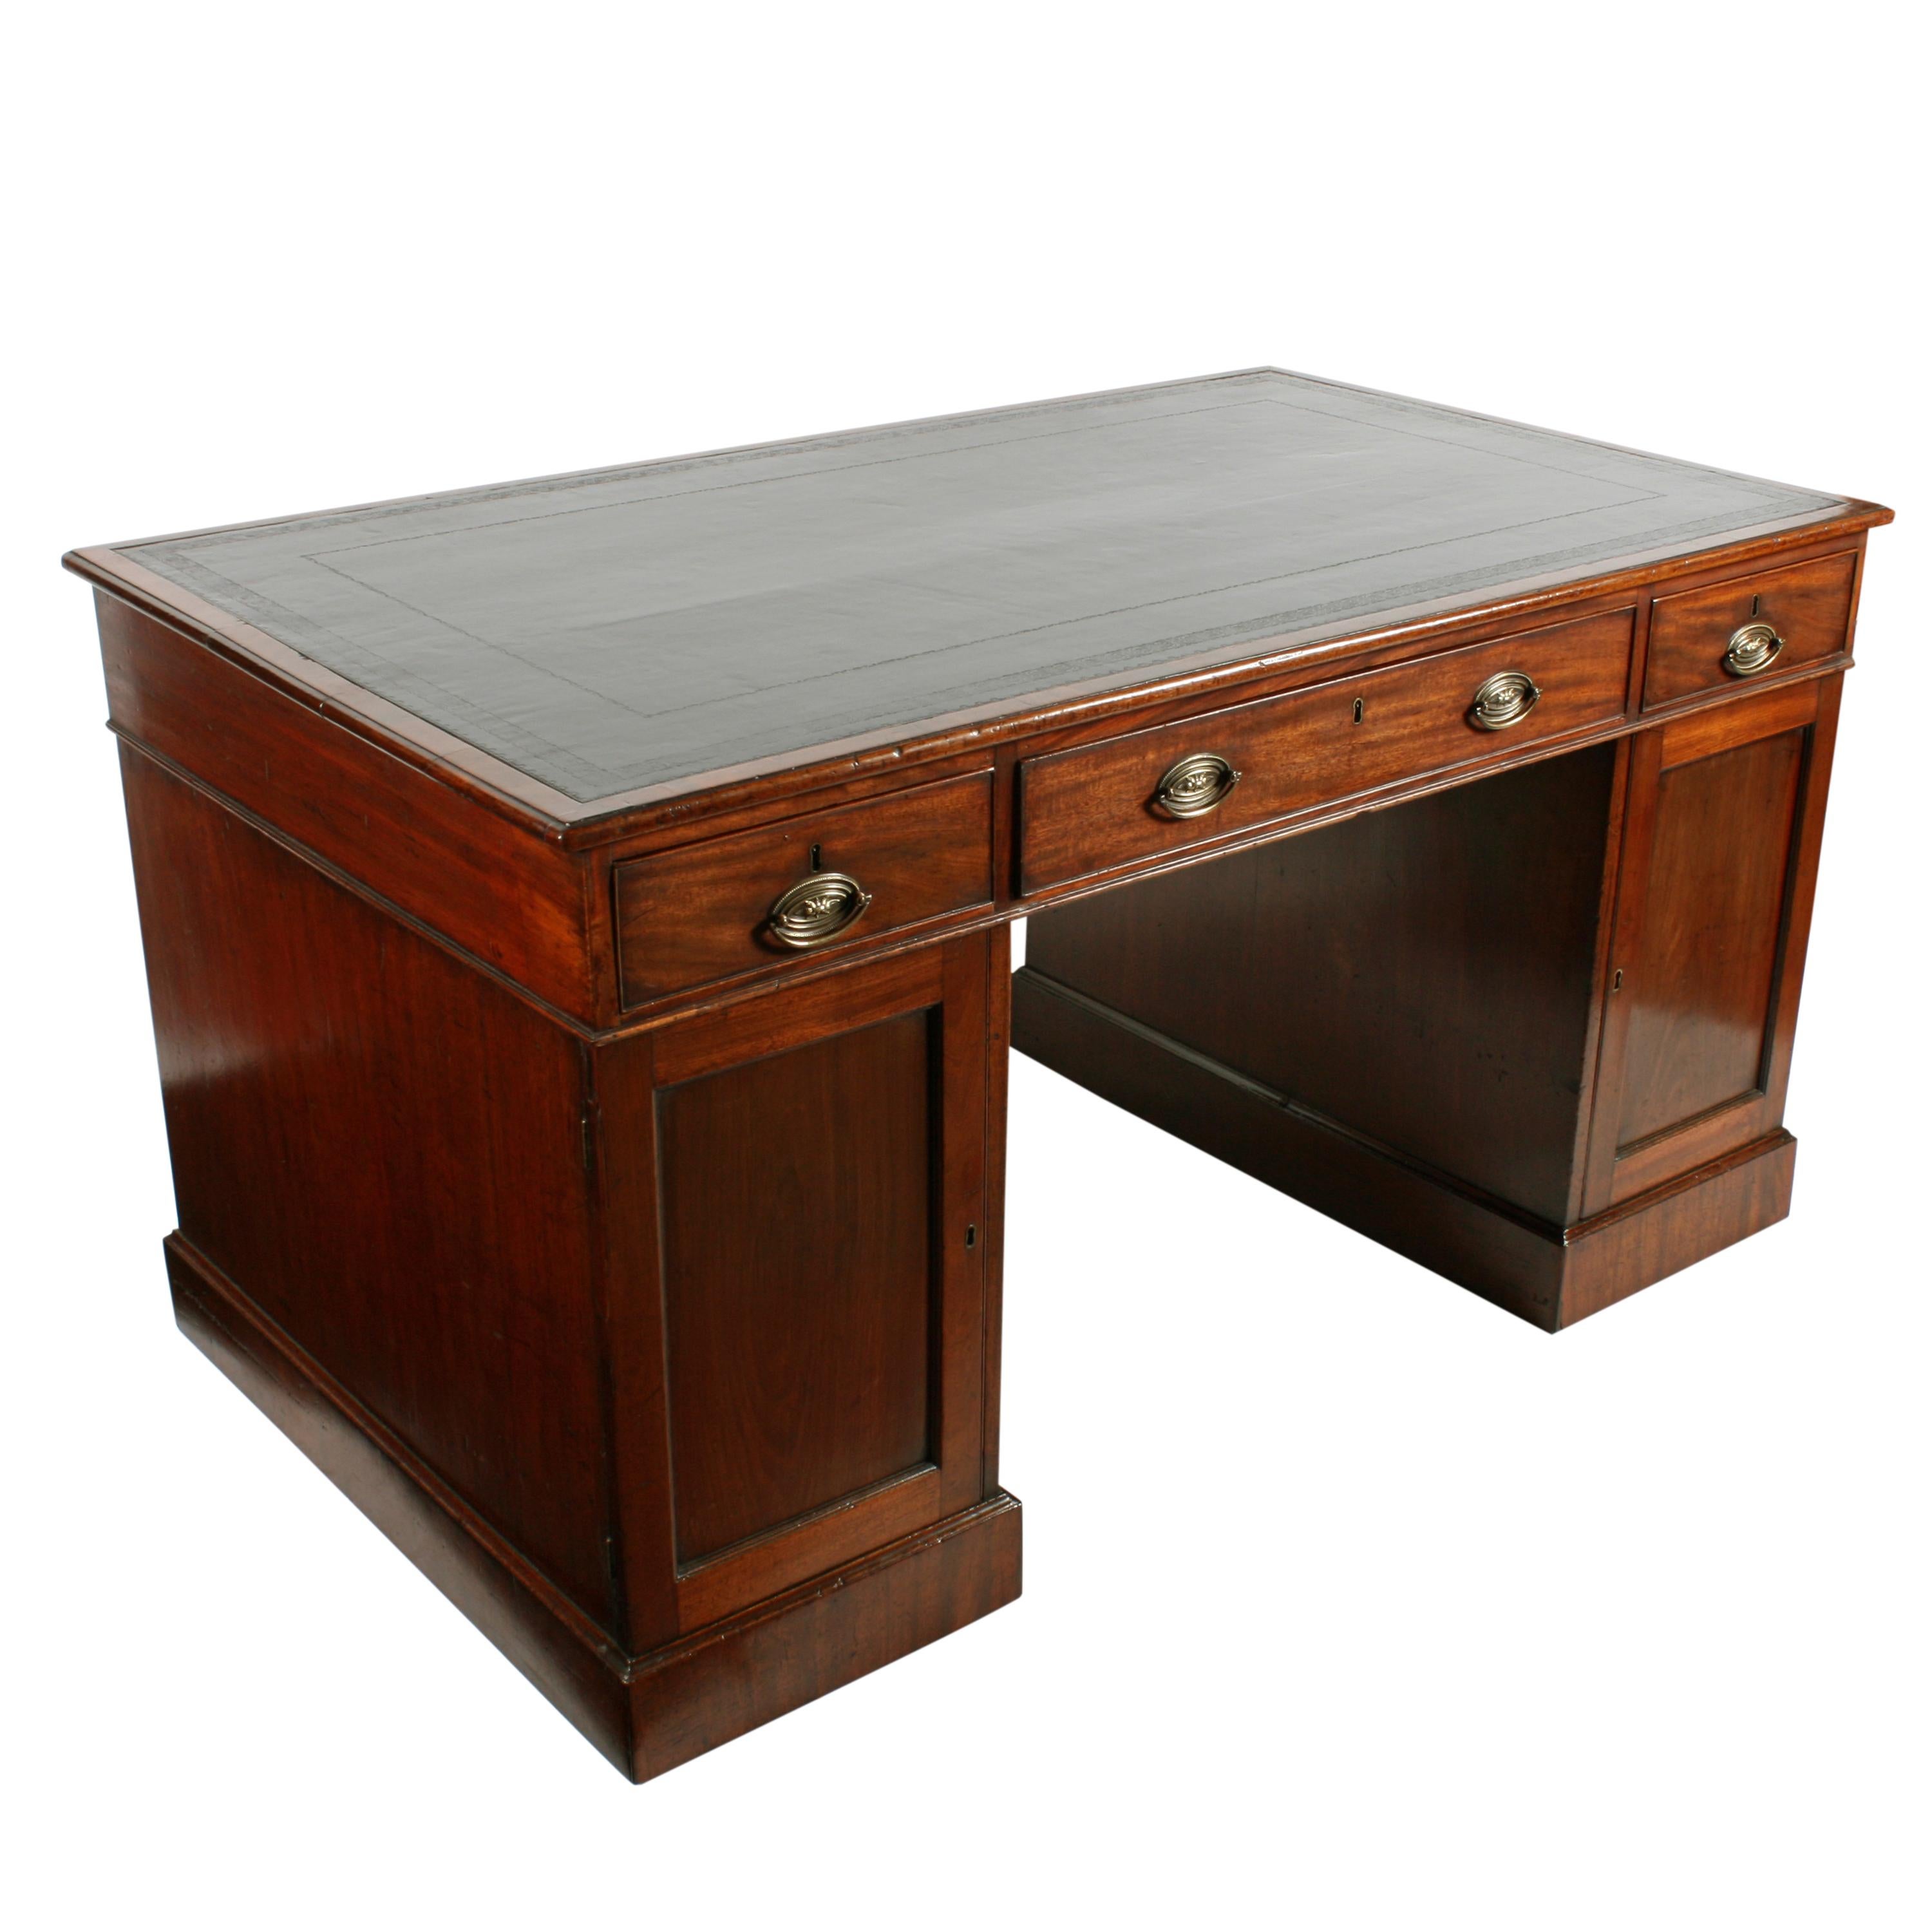 A Georgian mahogany partner's desk.

The desk has twelve drawers, two cupboards and a tooled black leather top.

The desk has nine oak lined drawers to one side and three drawers and two cupboards to the other side.

The drawers have a cock